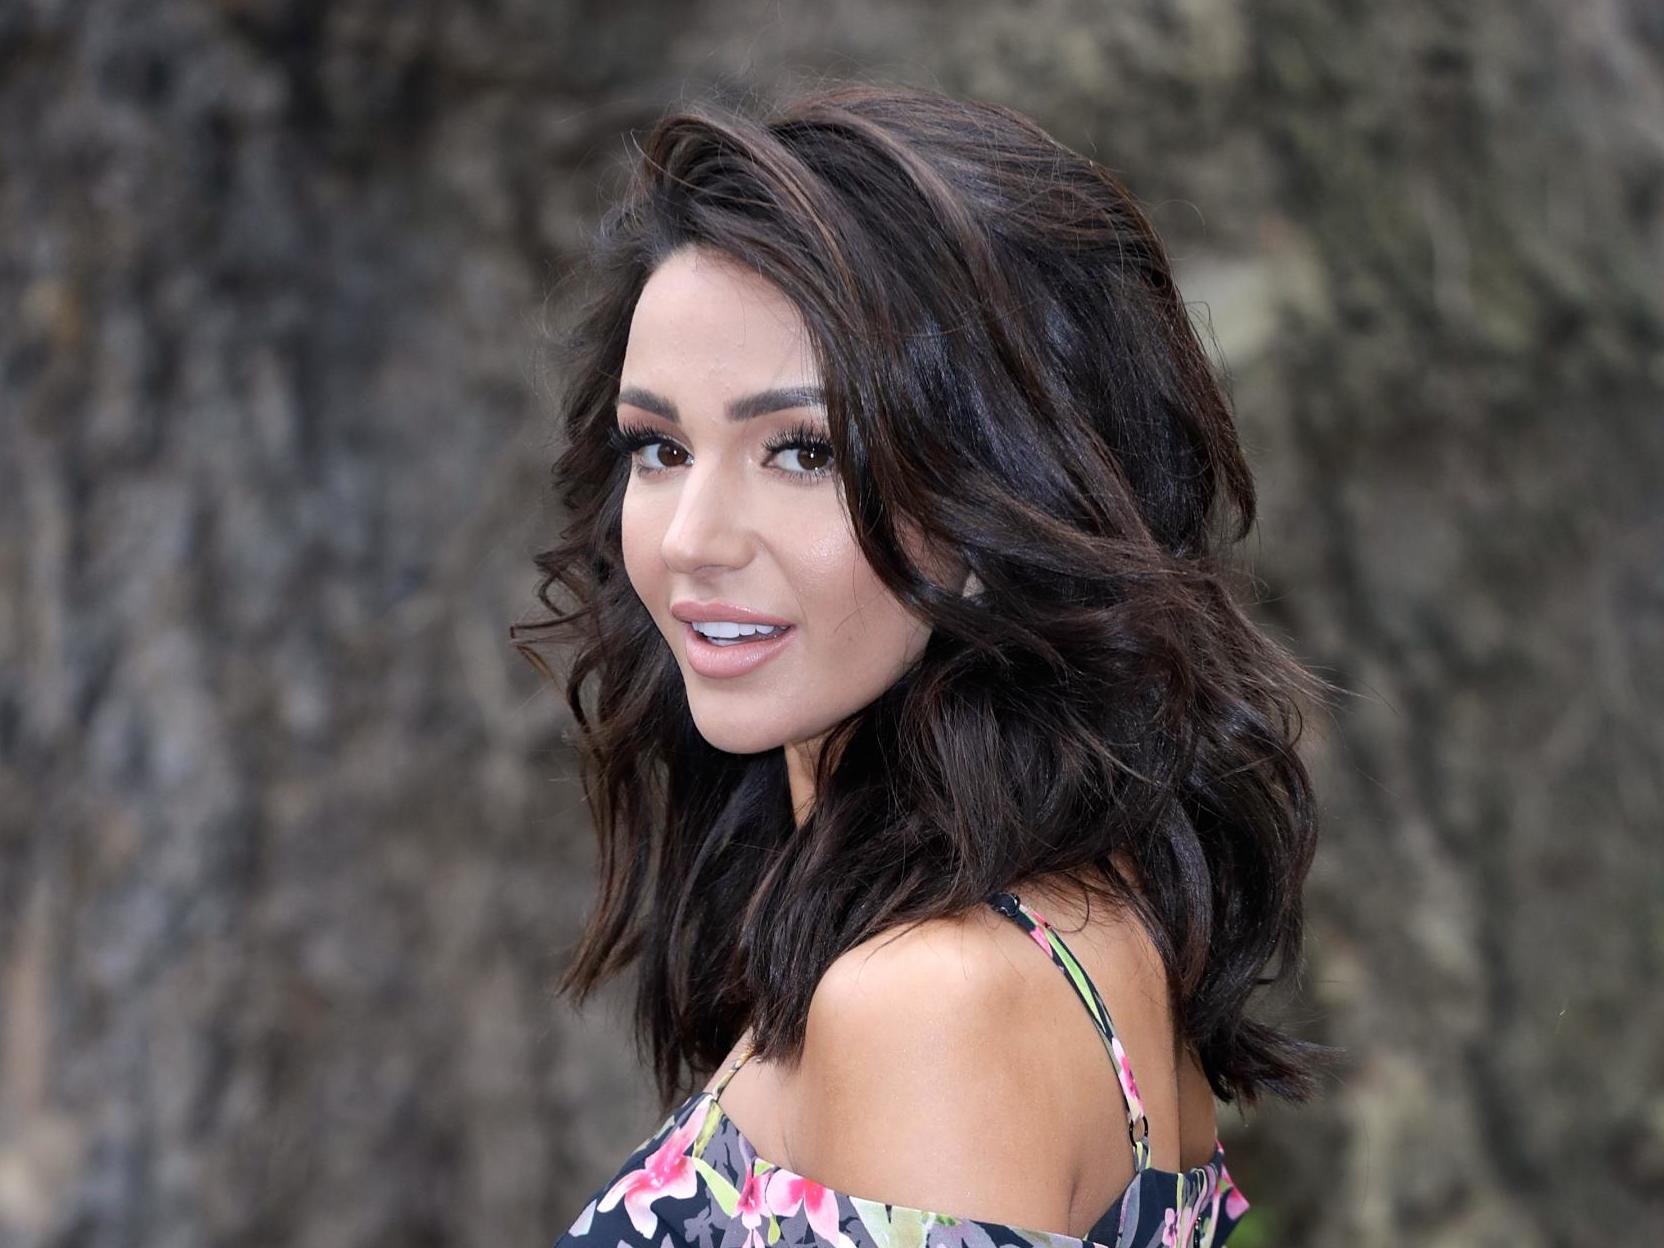 Michelle Keegan photographed in 2018